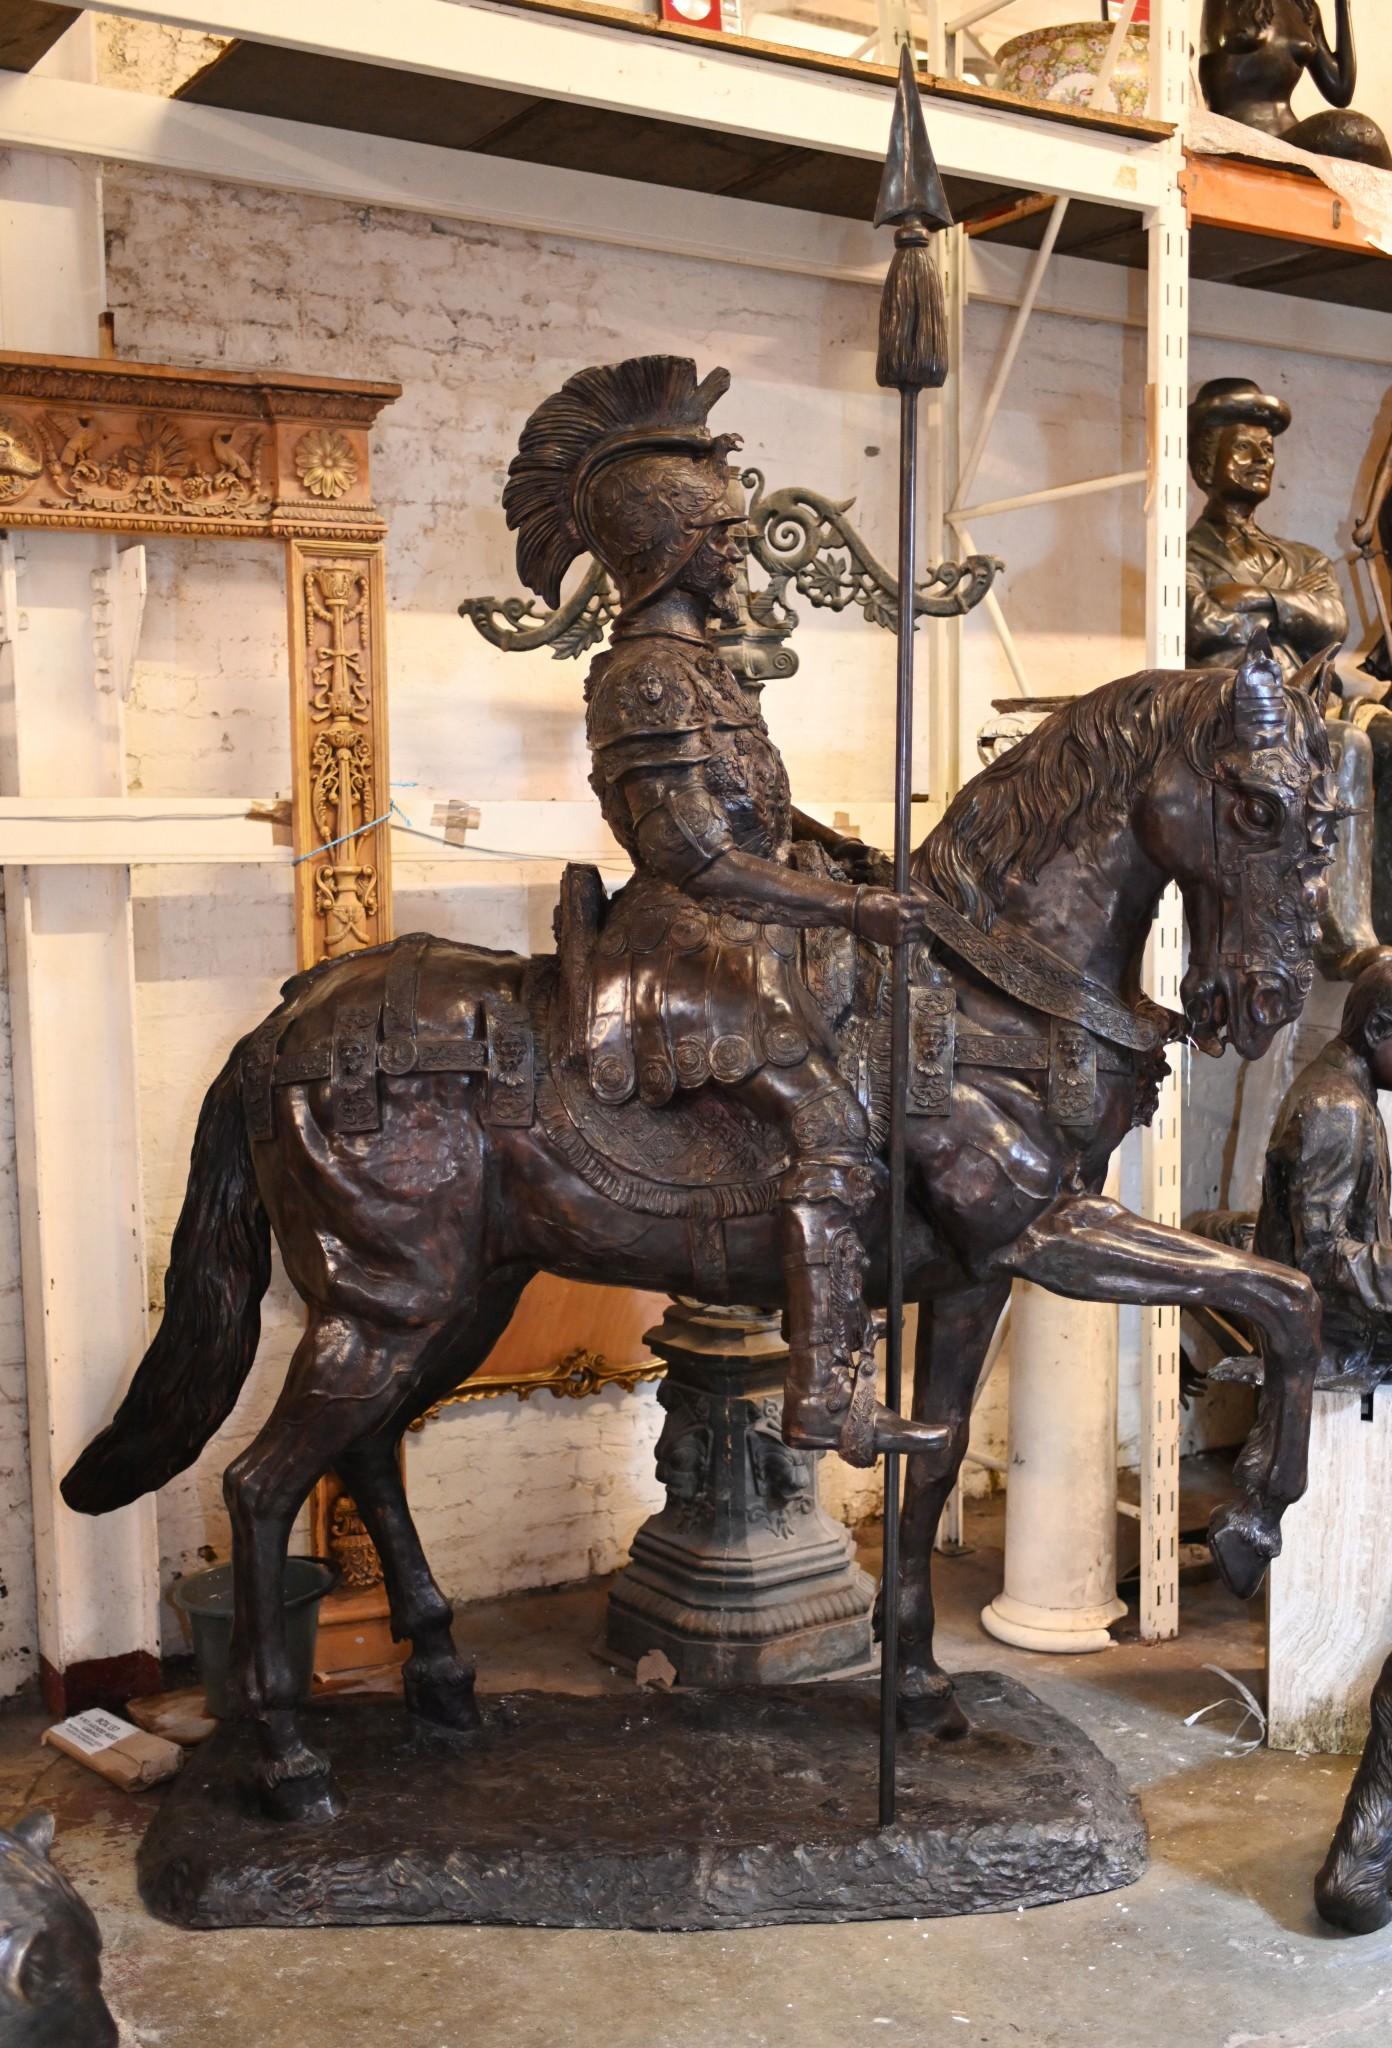 You always needed a lifesize bronze horse with seated Roman Gladiator on top, right?
What an amazing, unique and colossal work of art
Fantastic and unique piece - real collectors piece
Of course being bronze this can live outside with no fear of